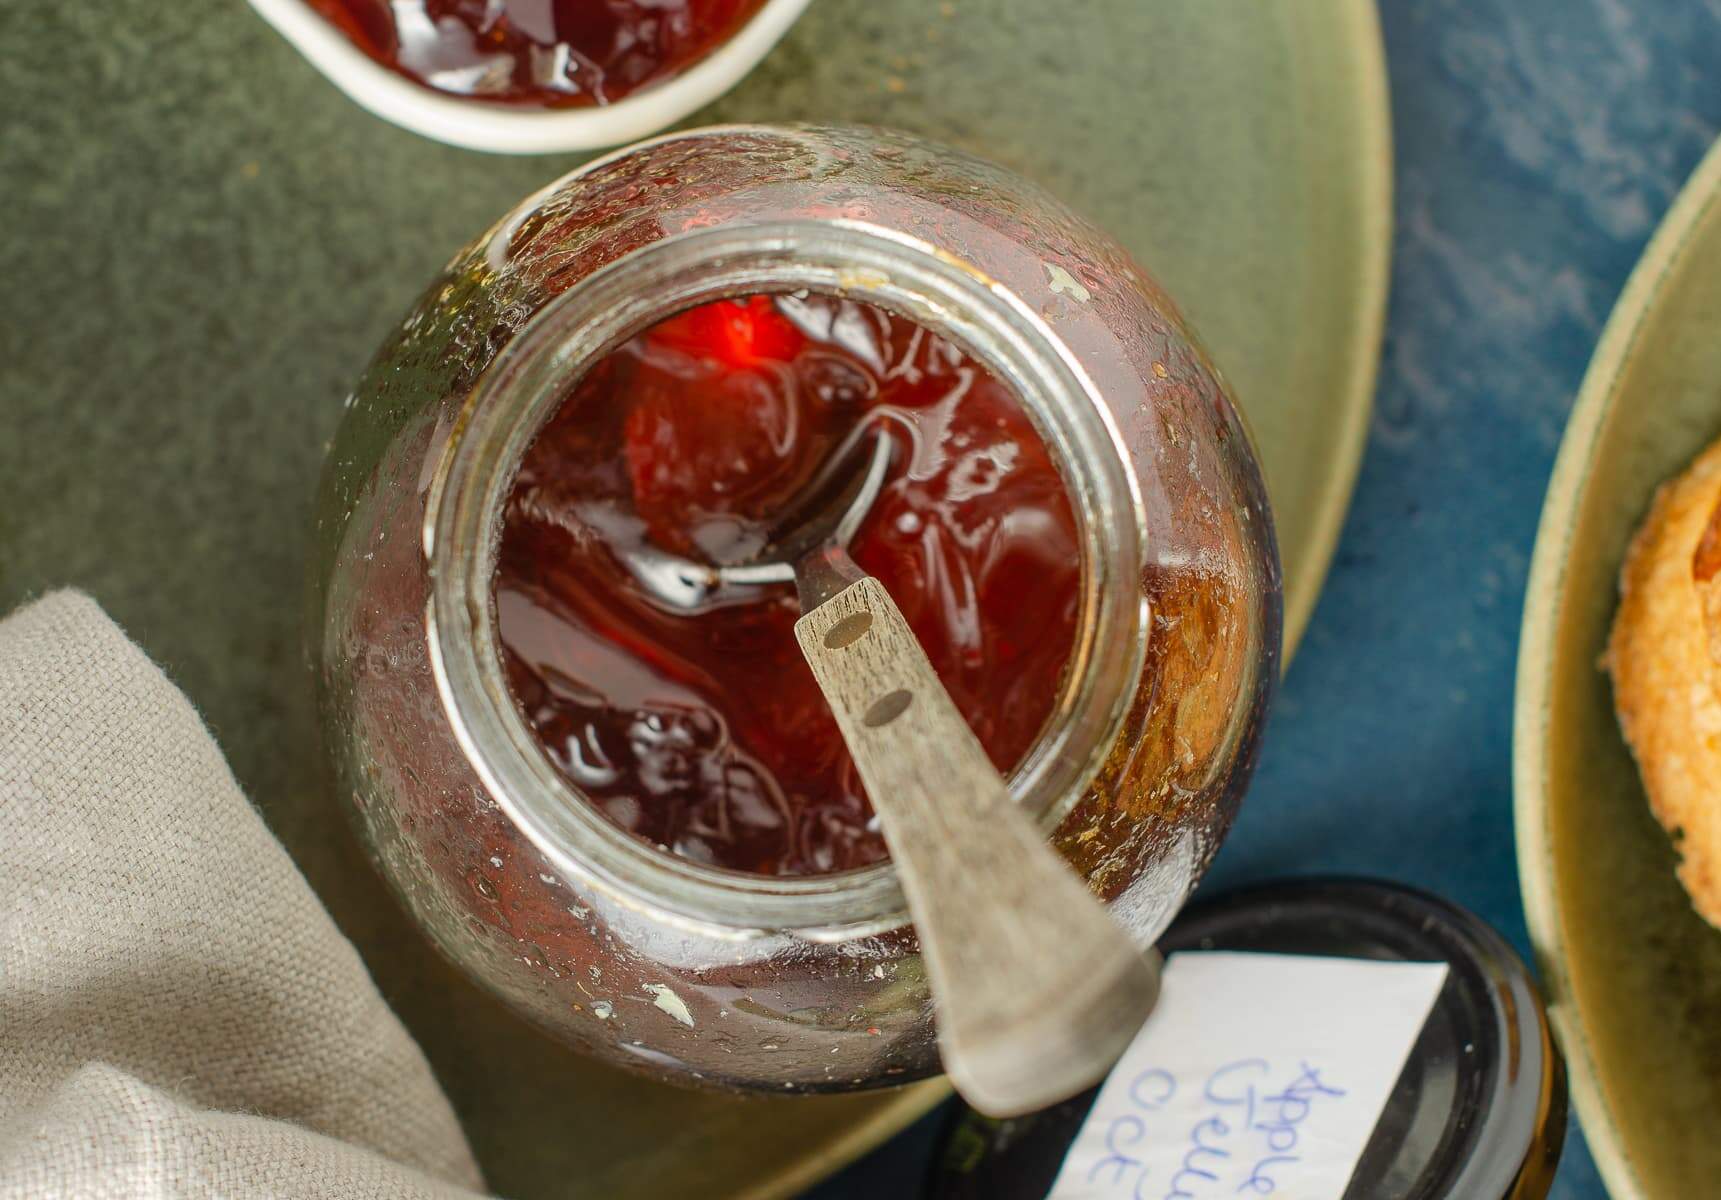 Looking down into a half full jar of apple jelly / jam